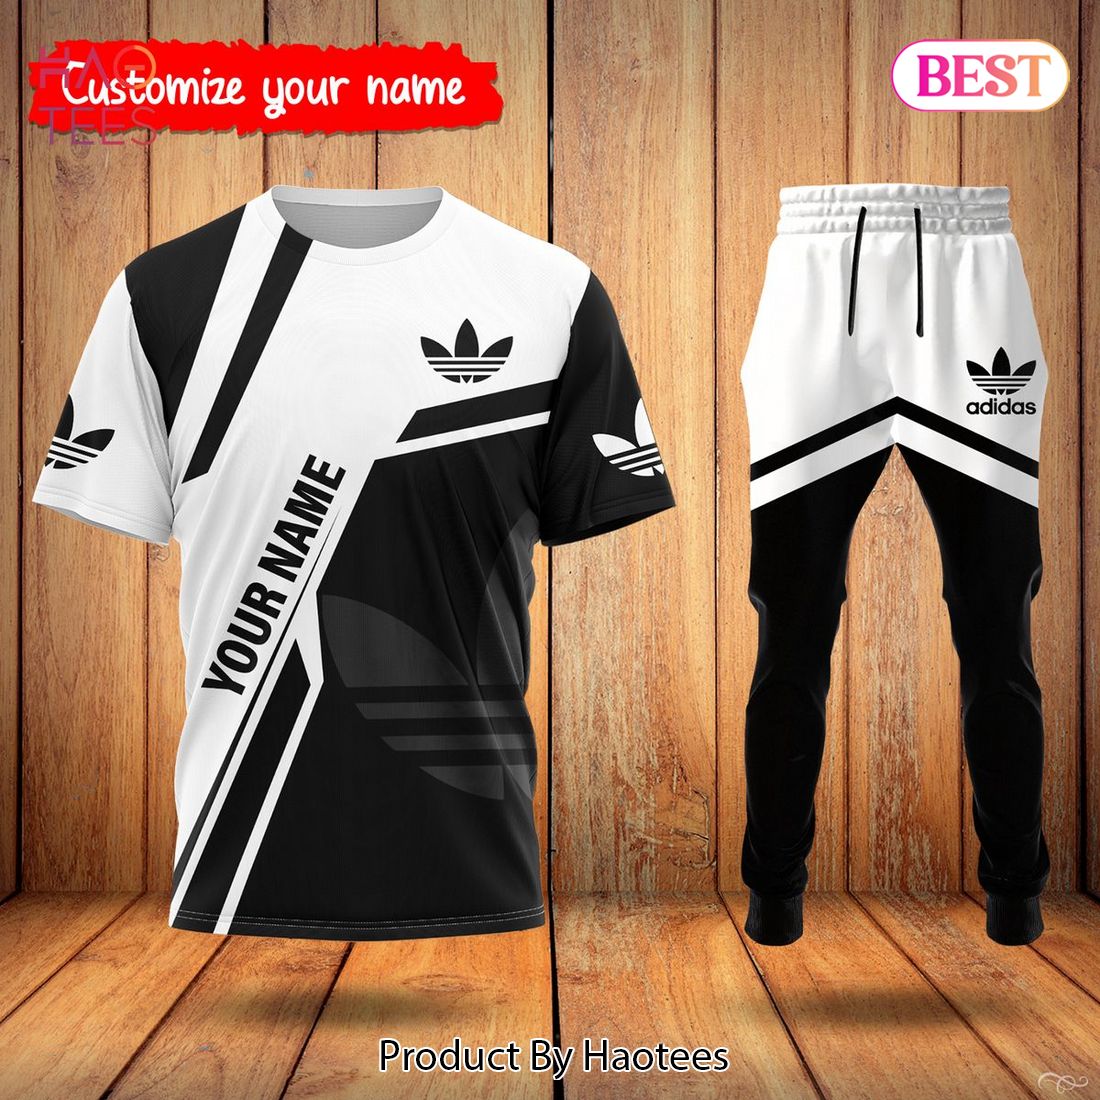 THE BEST Adidas Luxury Brand Black Mix White T-Shirt And Pants Limited Edition